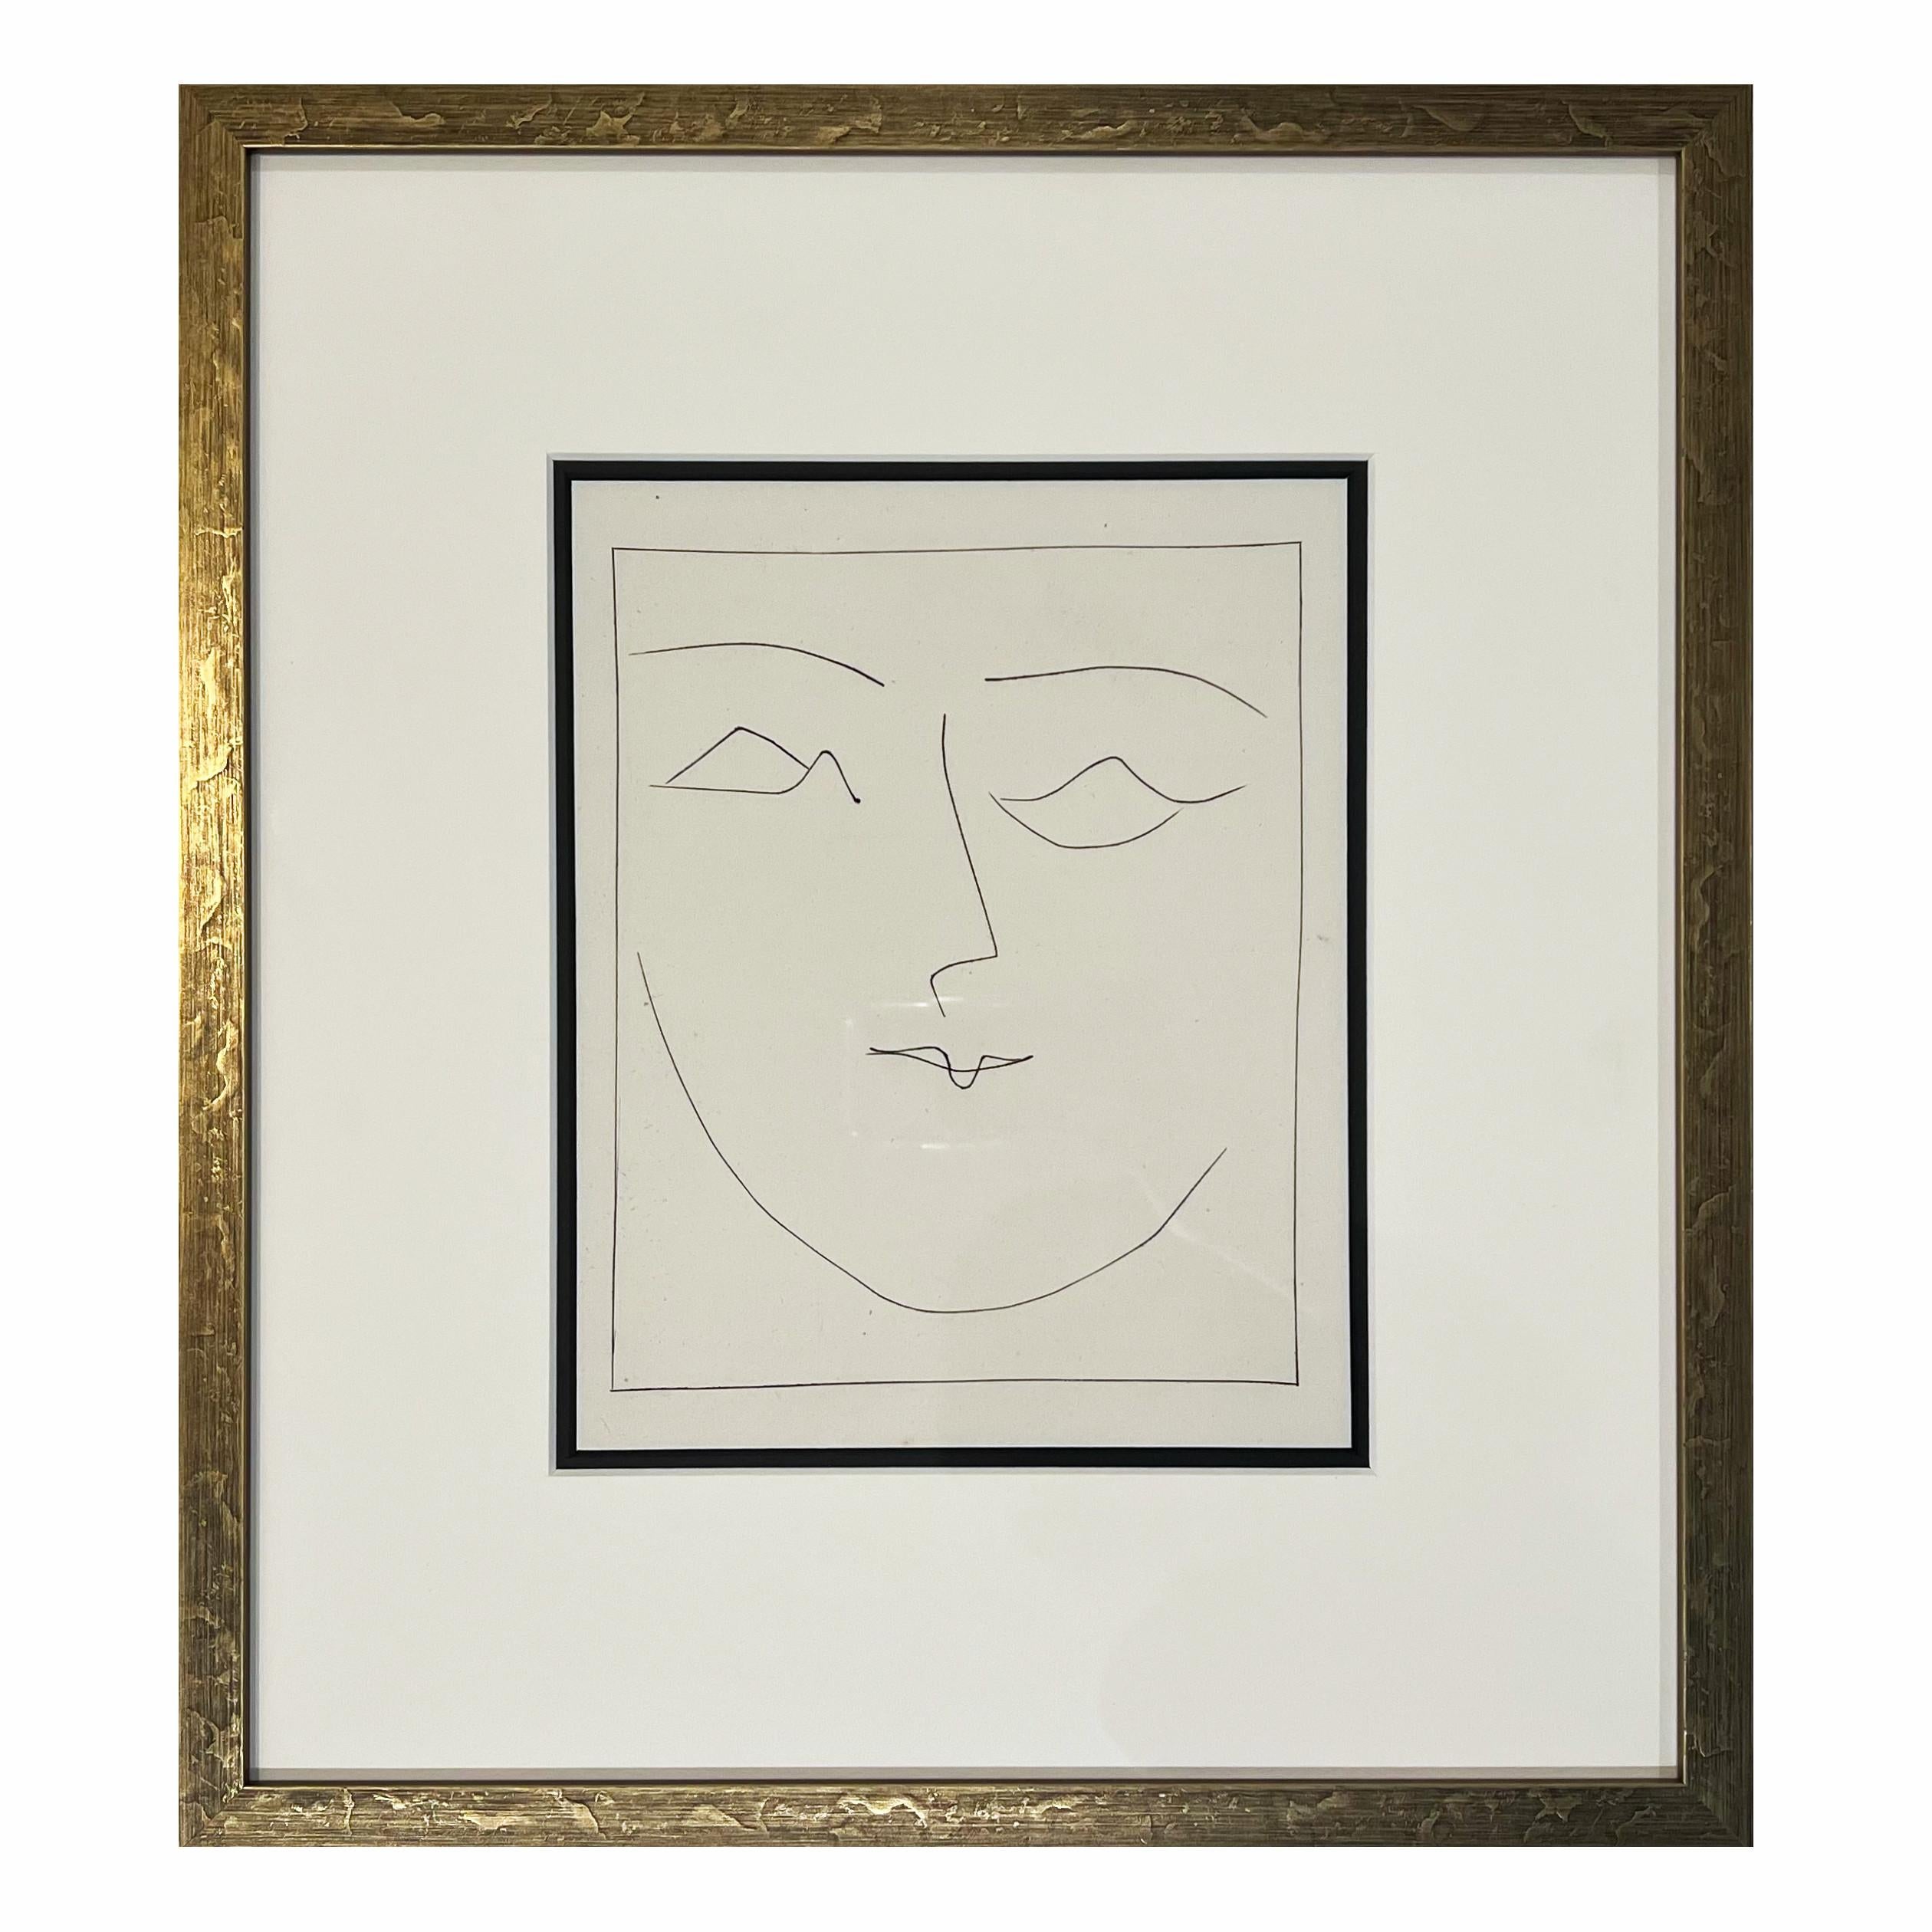 Square Head of a Woman Pouting